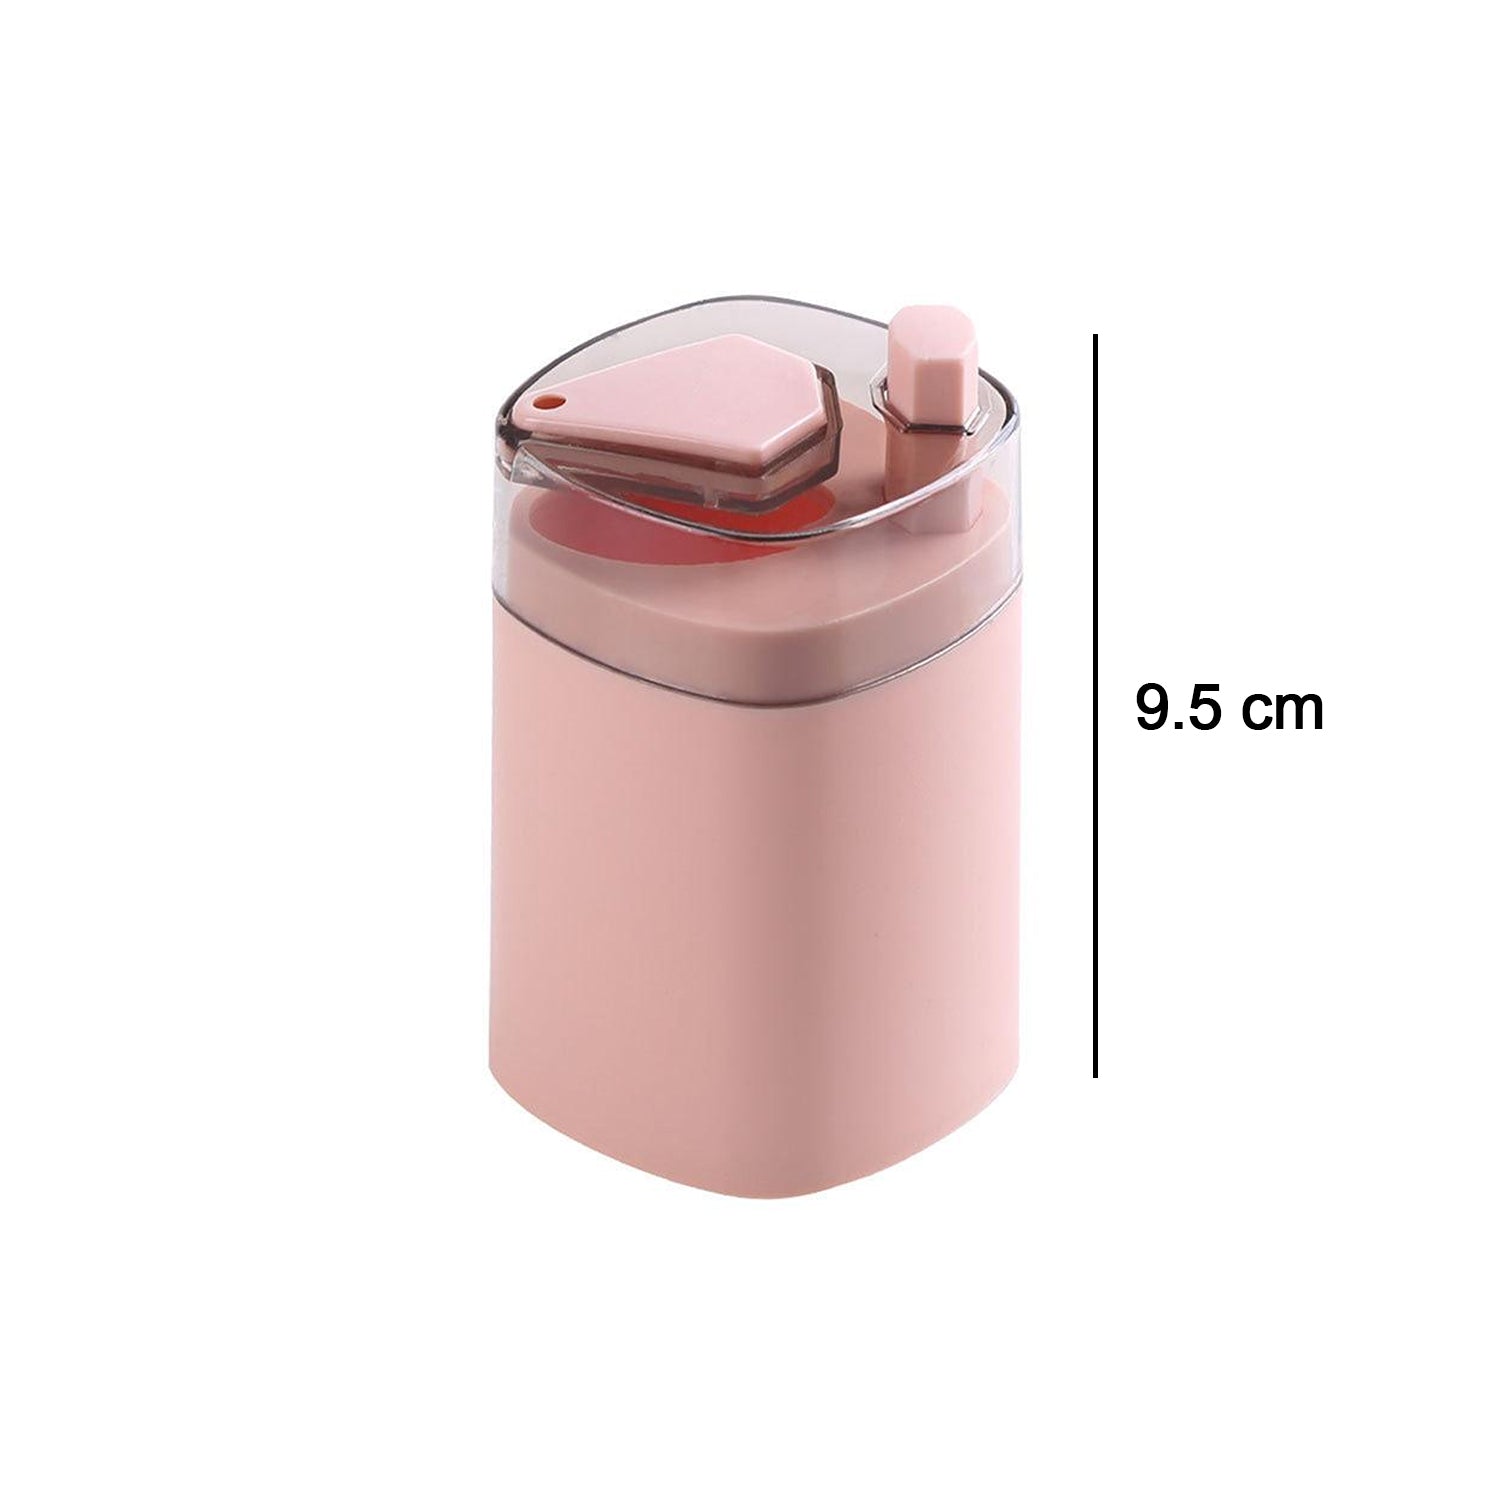 4005 Toothpick Holder Dispenser, Pop-Up Automatic Toothpick Dispenser for Kitchen Restaurant Thickening Toothpicks Container Pocket Novelty, Safe Container Toothpick Storage Box. - China, 0.082 kgs